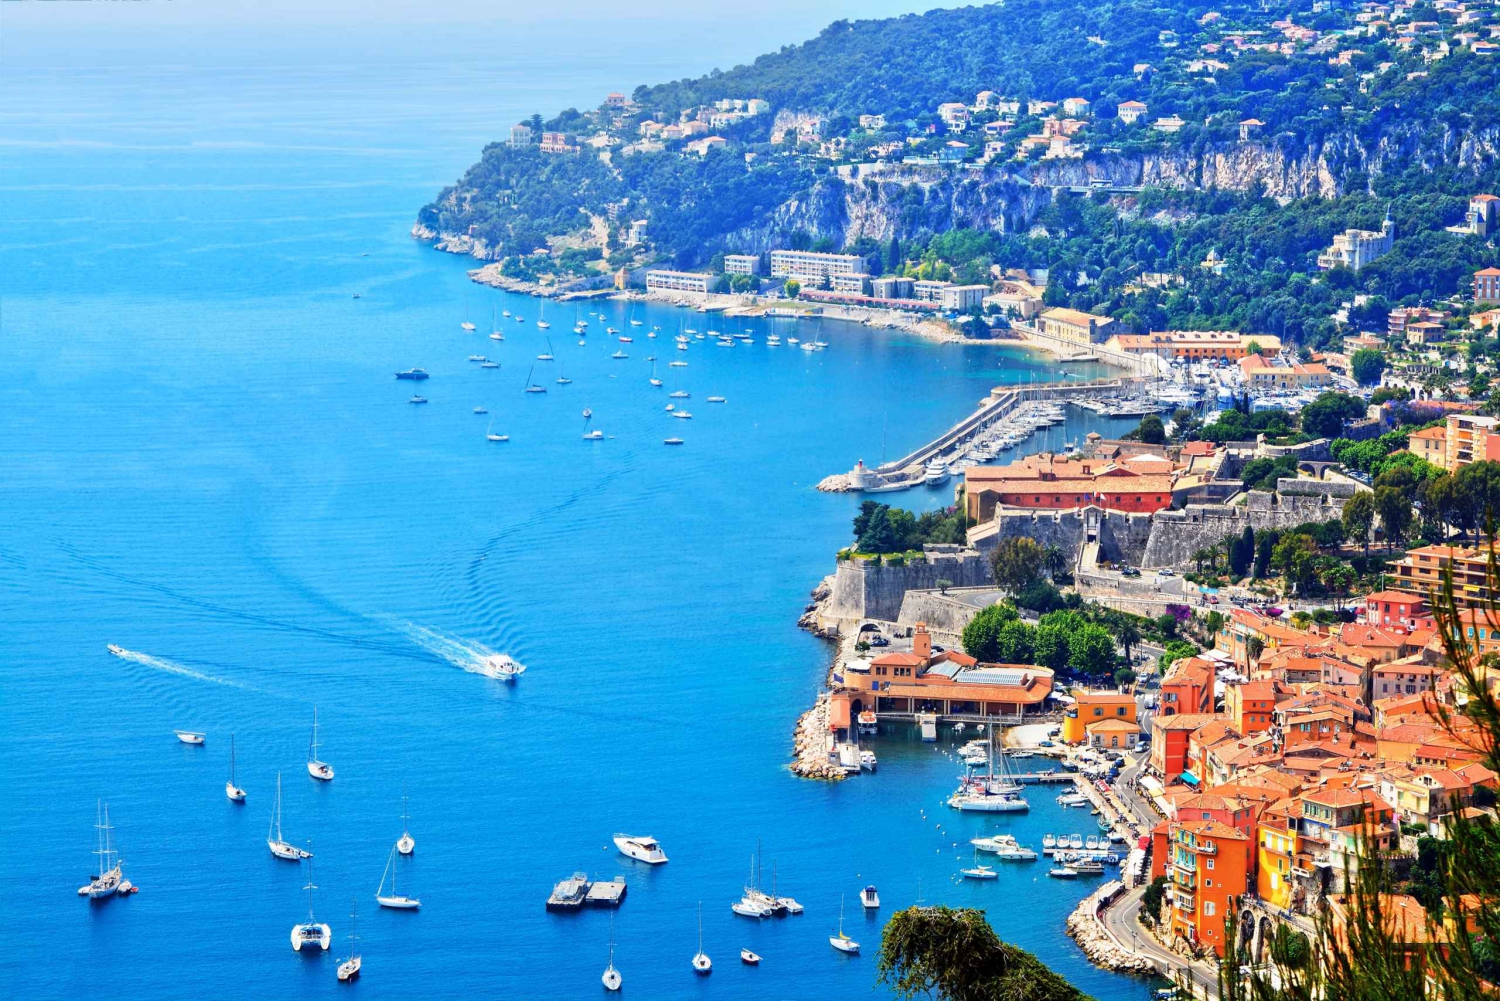 guided tour to discover and enjoy french riviera, full day